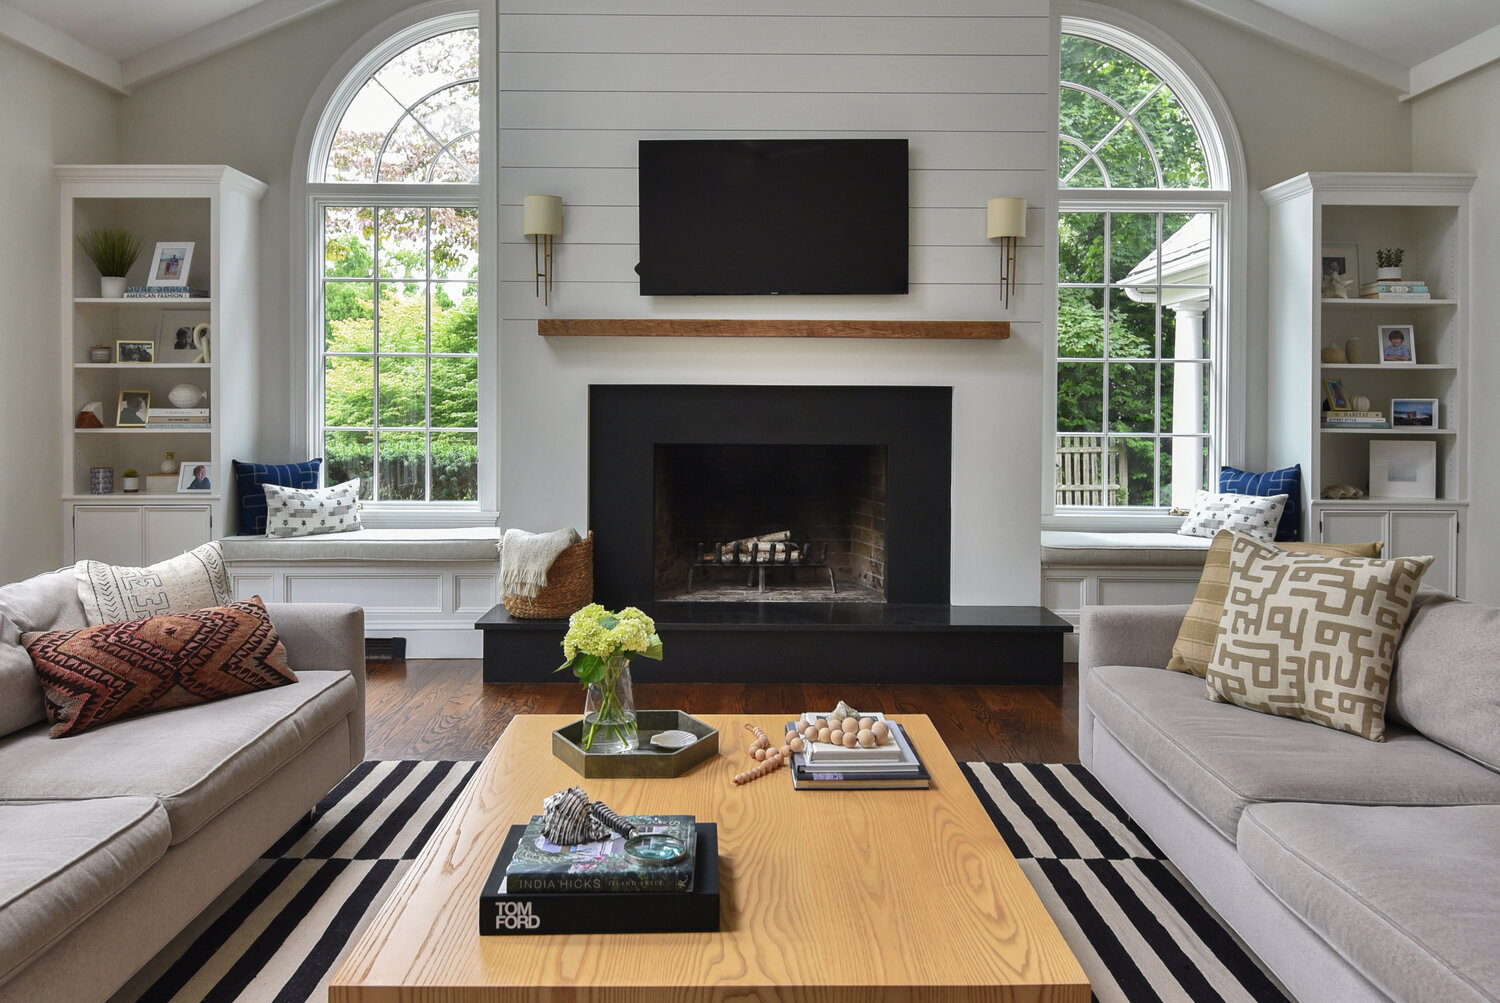 The striped area rug mirrors the shiplap above with a cosmopolitan twist